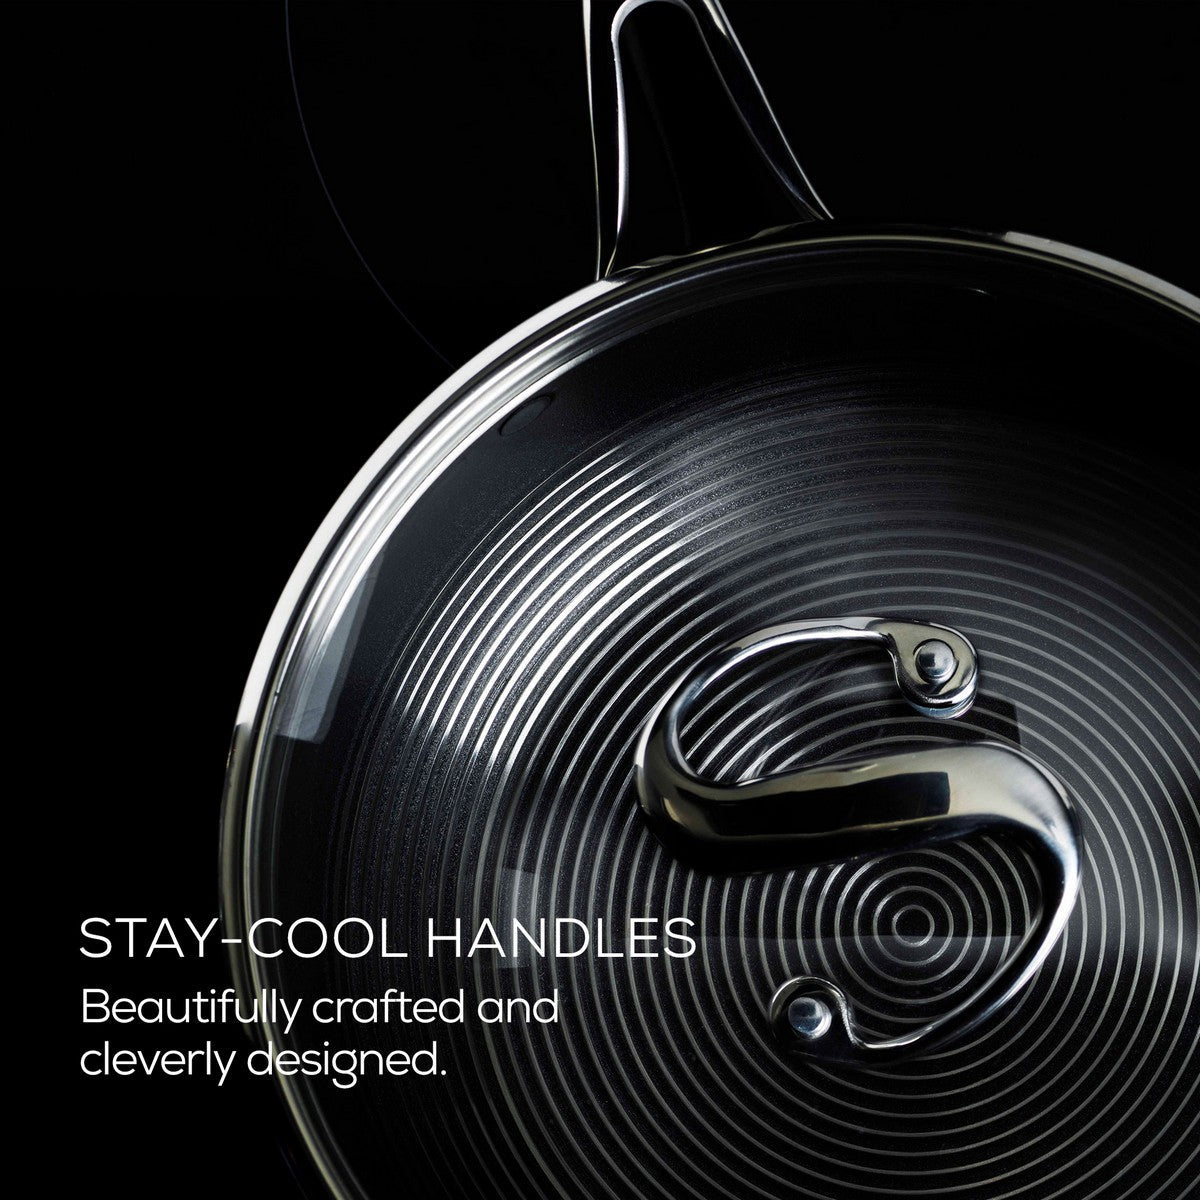 Circulon C-Series Nonstick Clad Stainless Steel Induction Covered Sauteuse 30cm